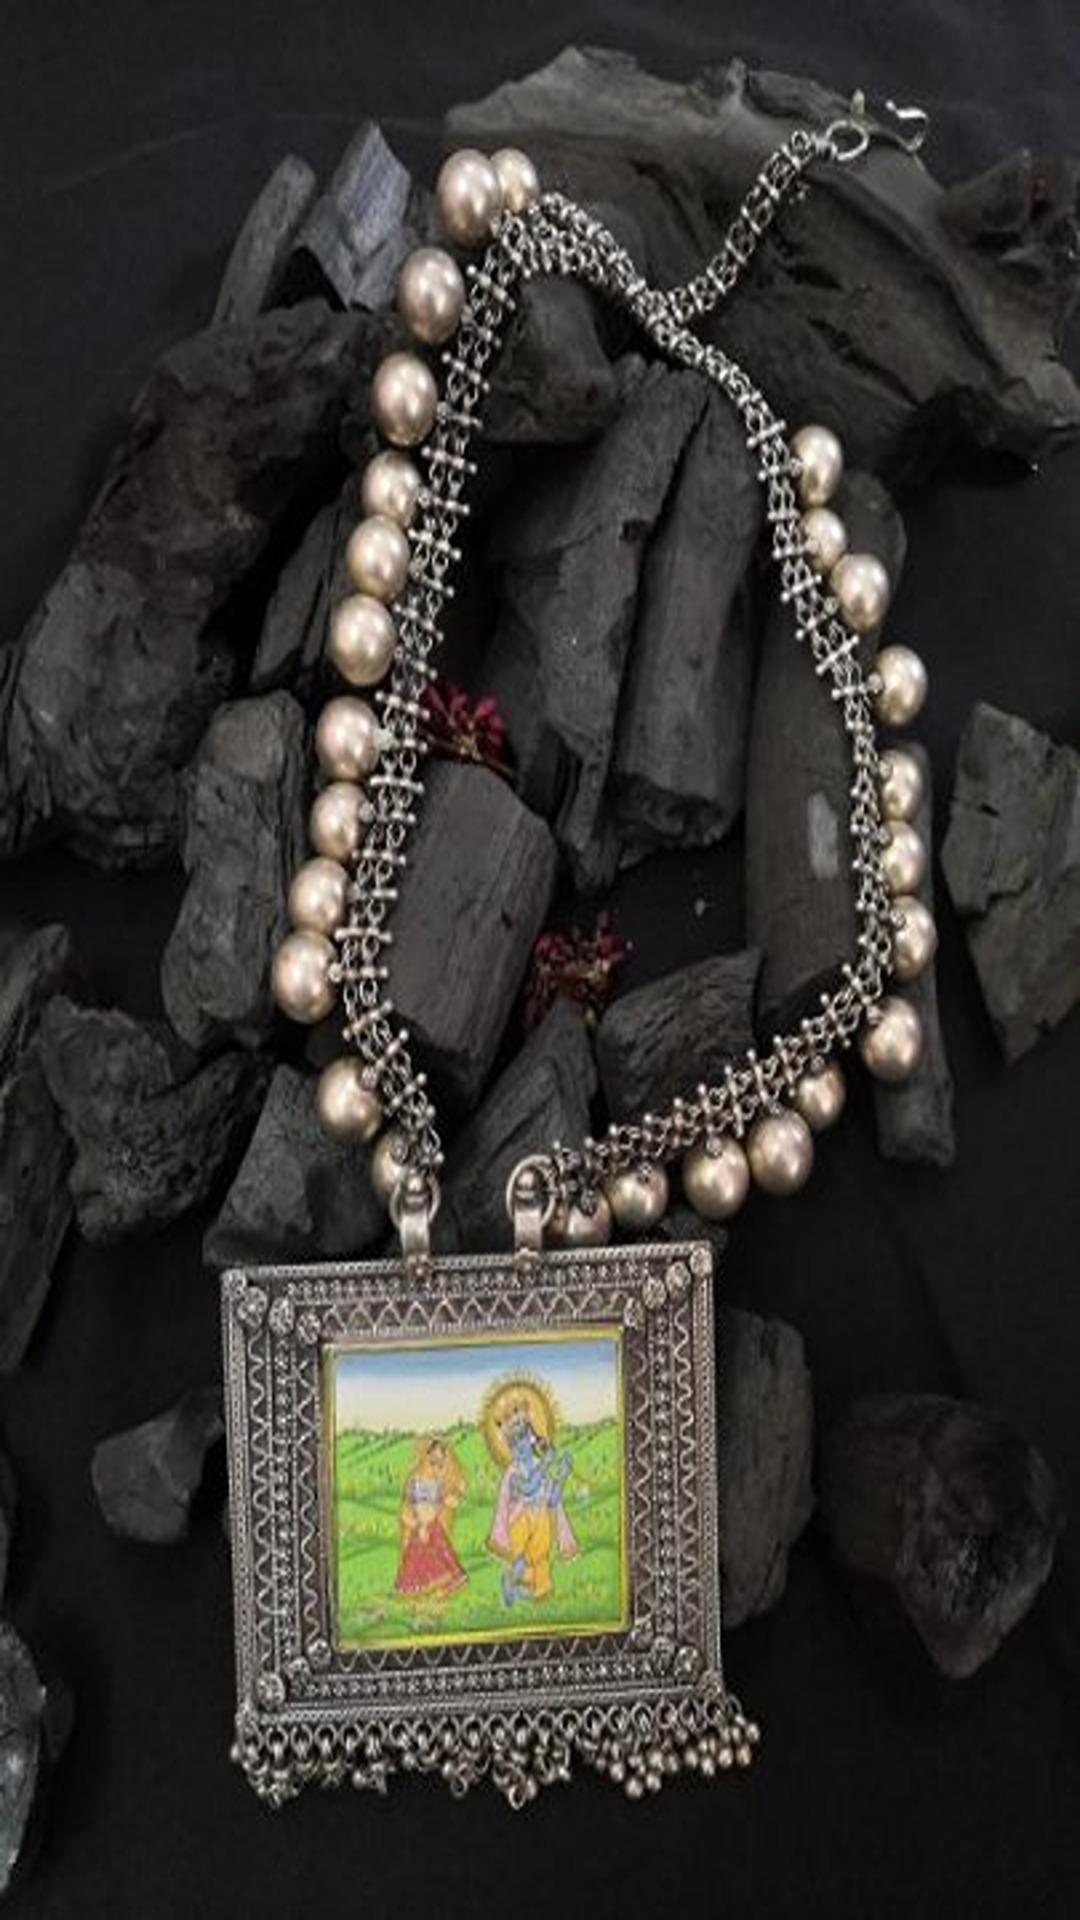 Krishna Oxidized Jewelry Indian jewelry, traditional Jewelry, Krishna thread necklace boho necklace, Temple Necklace mother’s day gift

Necklace With 925 Sterling Silver

Necklace Length : 16 Inch 

Necklace Weight : 222.514 gram

CARE INSTRUCTIONS